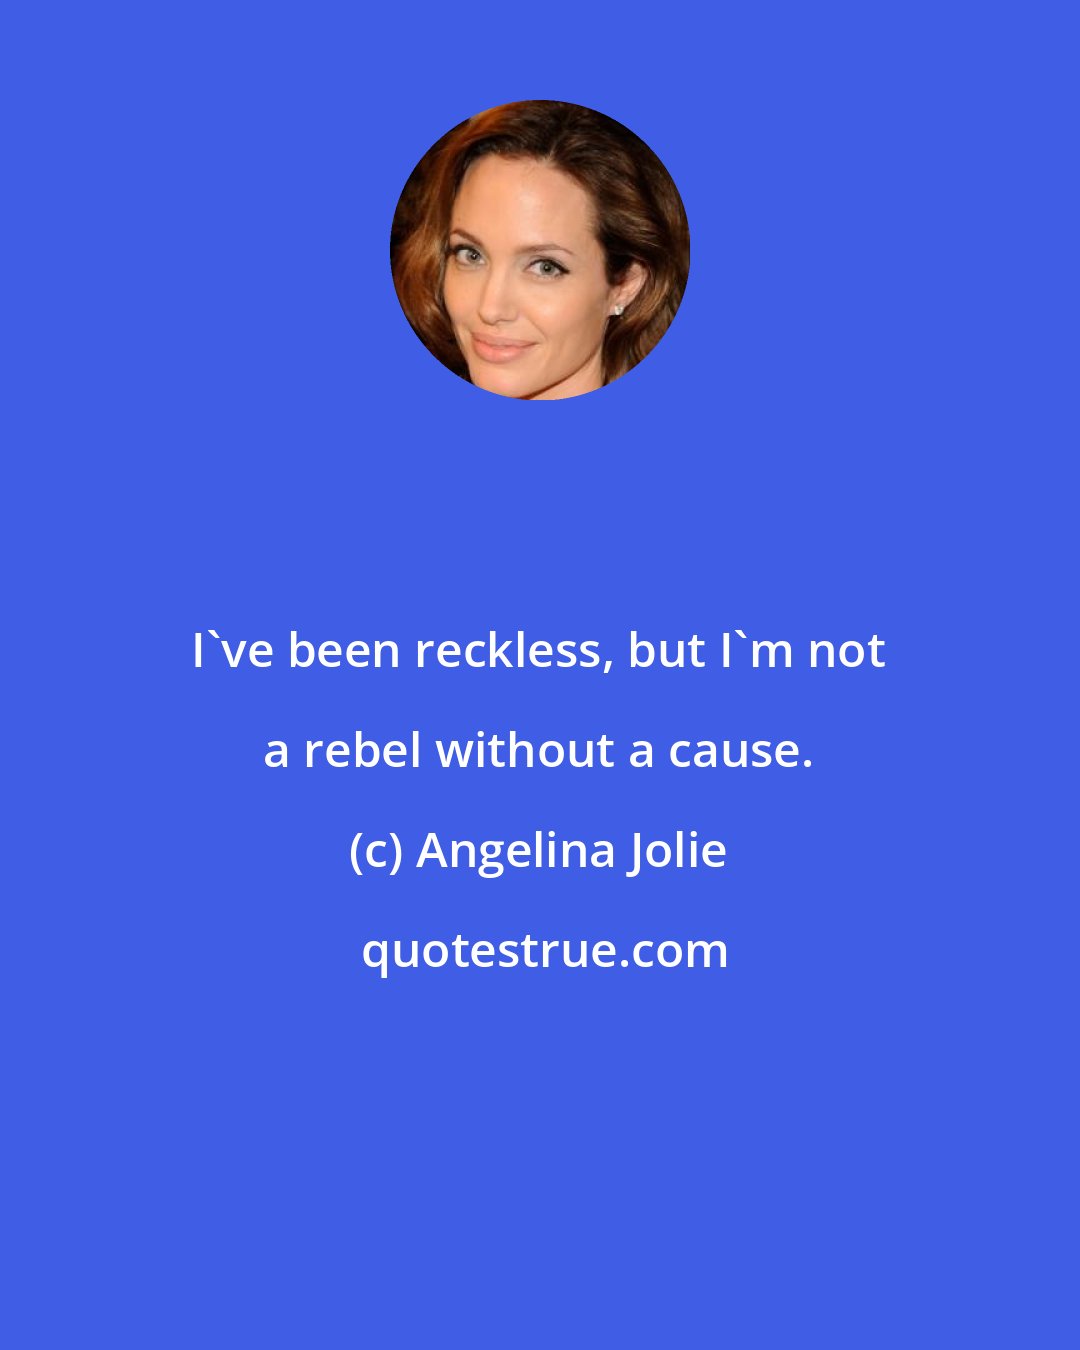 Angelina Jolie: I've been reckless, but I'm not a rebel without a cause.